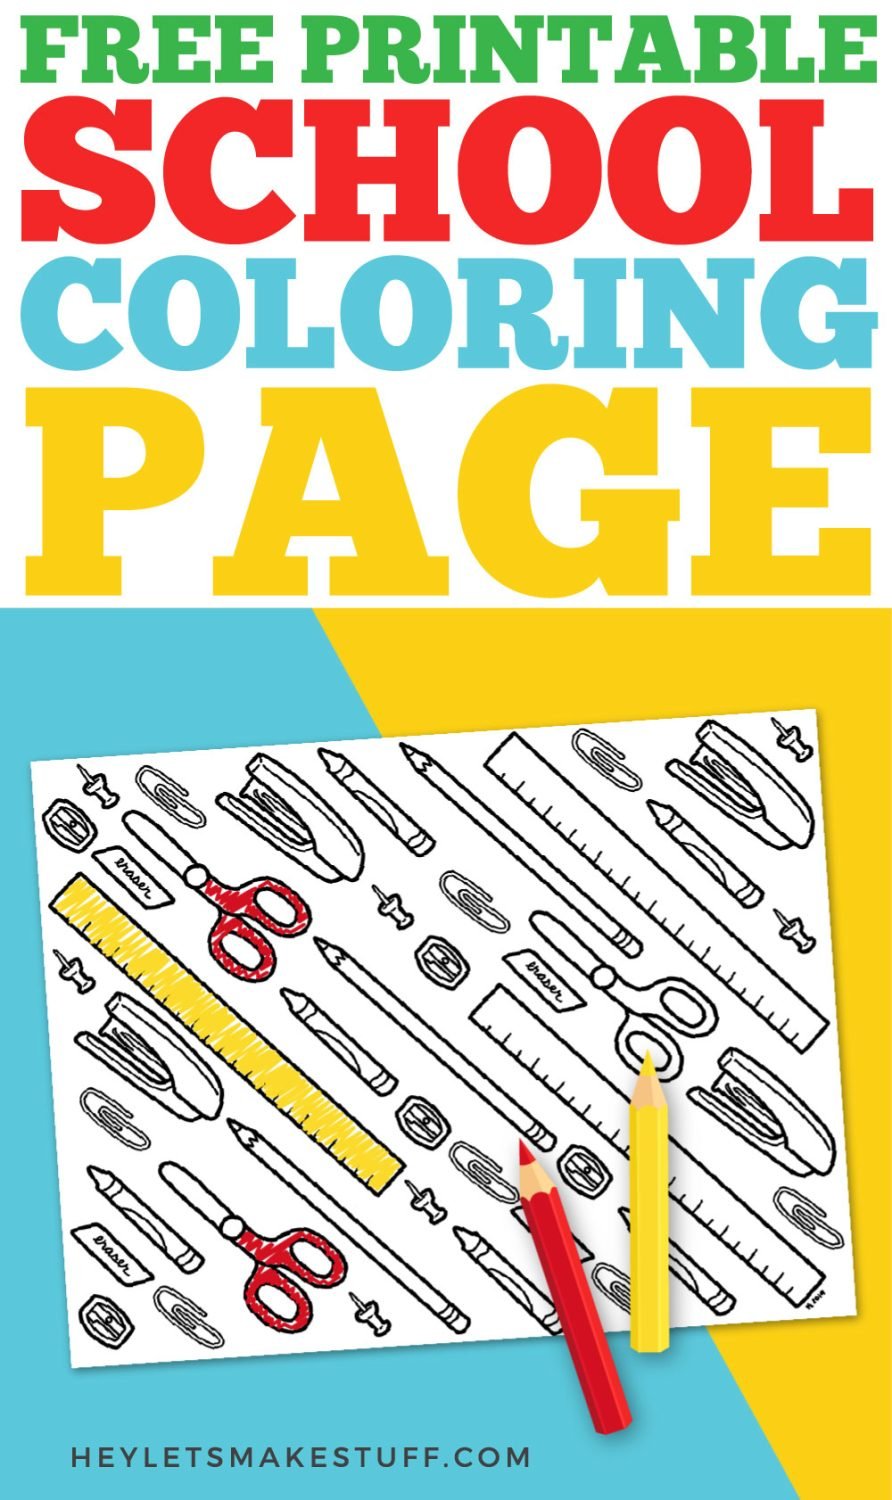 School Coloring Page pin image